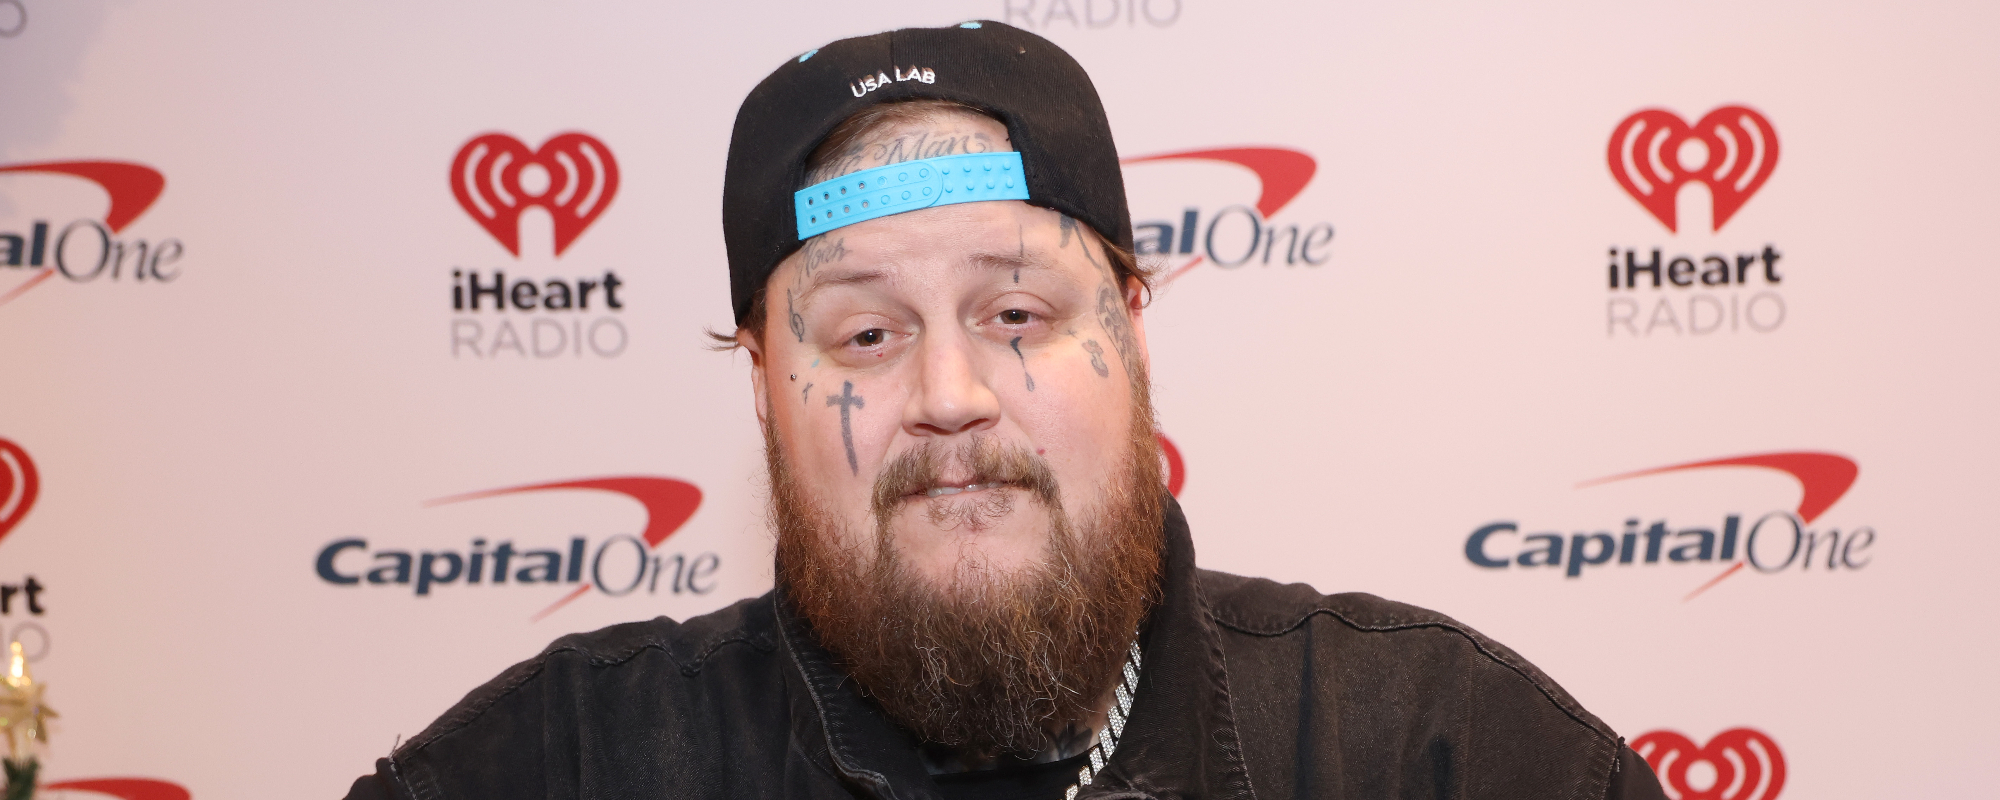 Jelly Roll’s Earnings: How Much Has the Country Star Made From Budding Music Career?